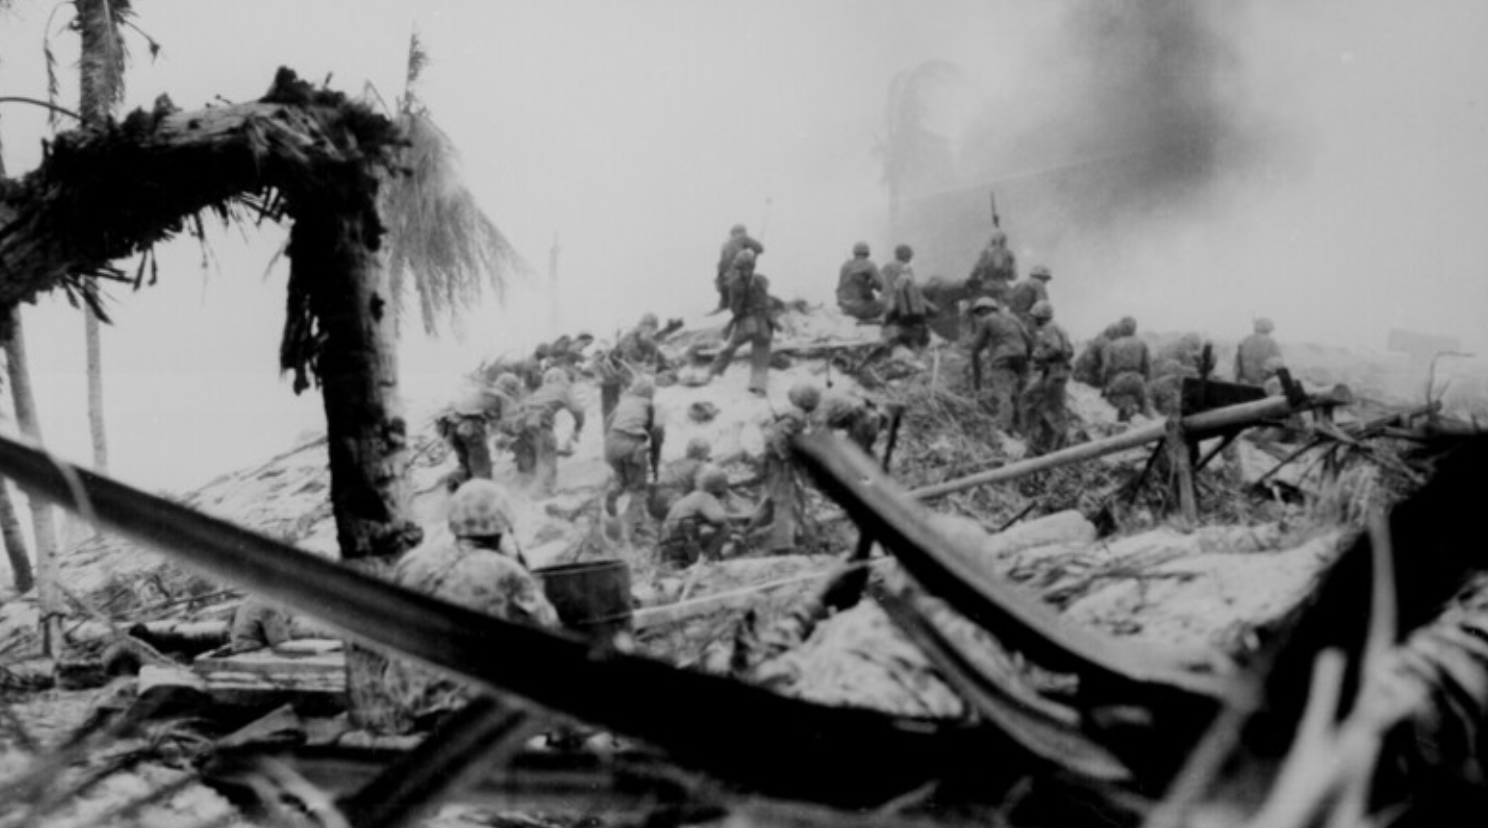 The Fight for Tarawa: 75th Anniversary of One of the Bloodiest Battles in the Pacific Theater of WWII